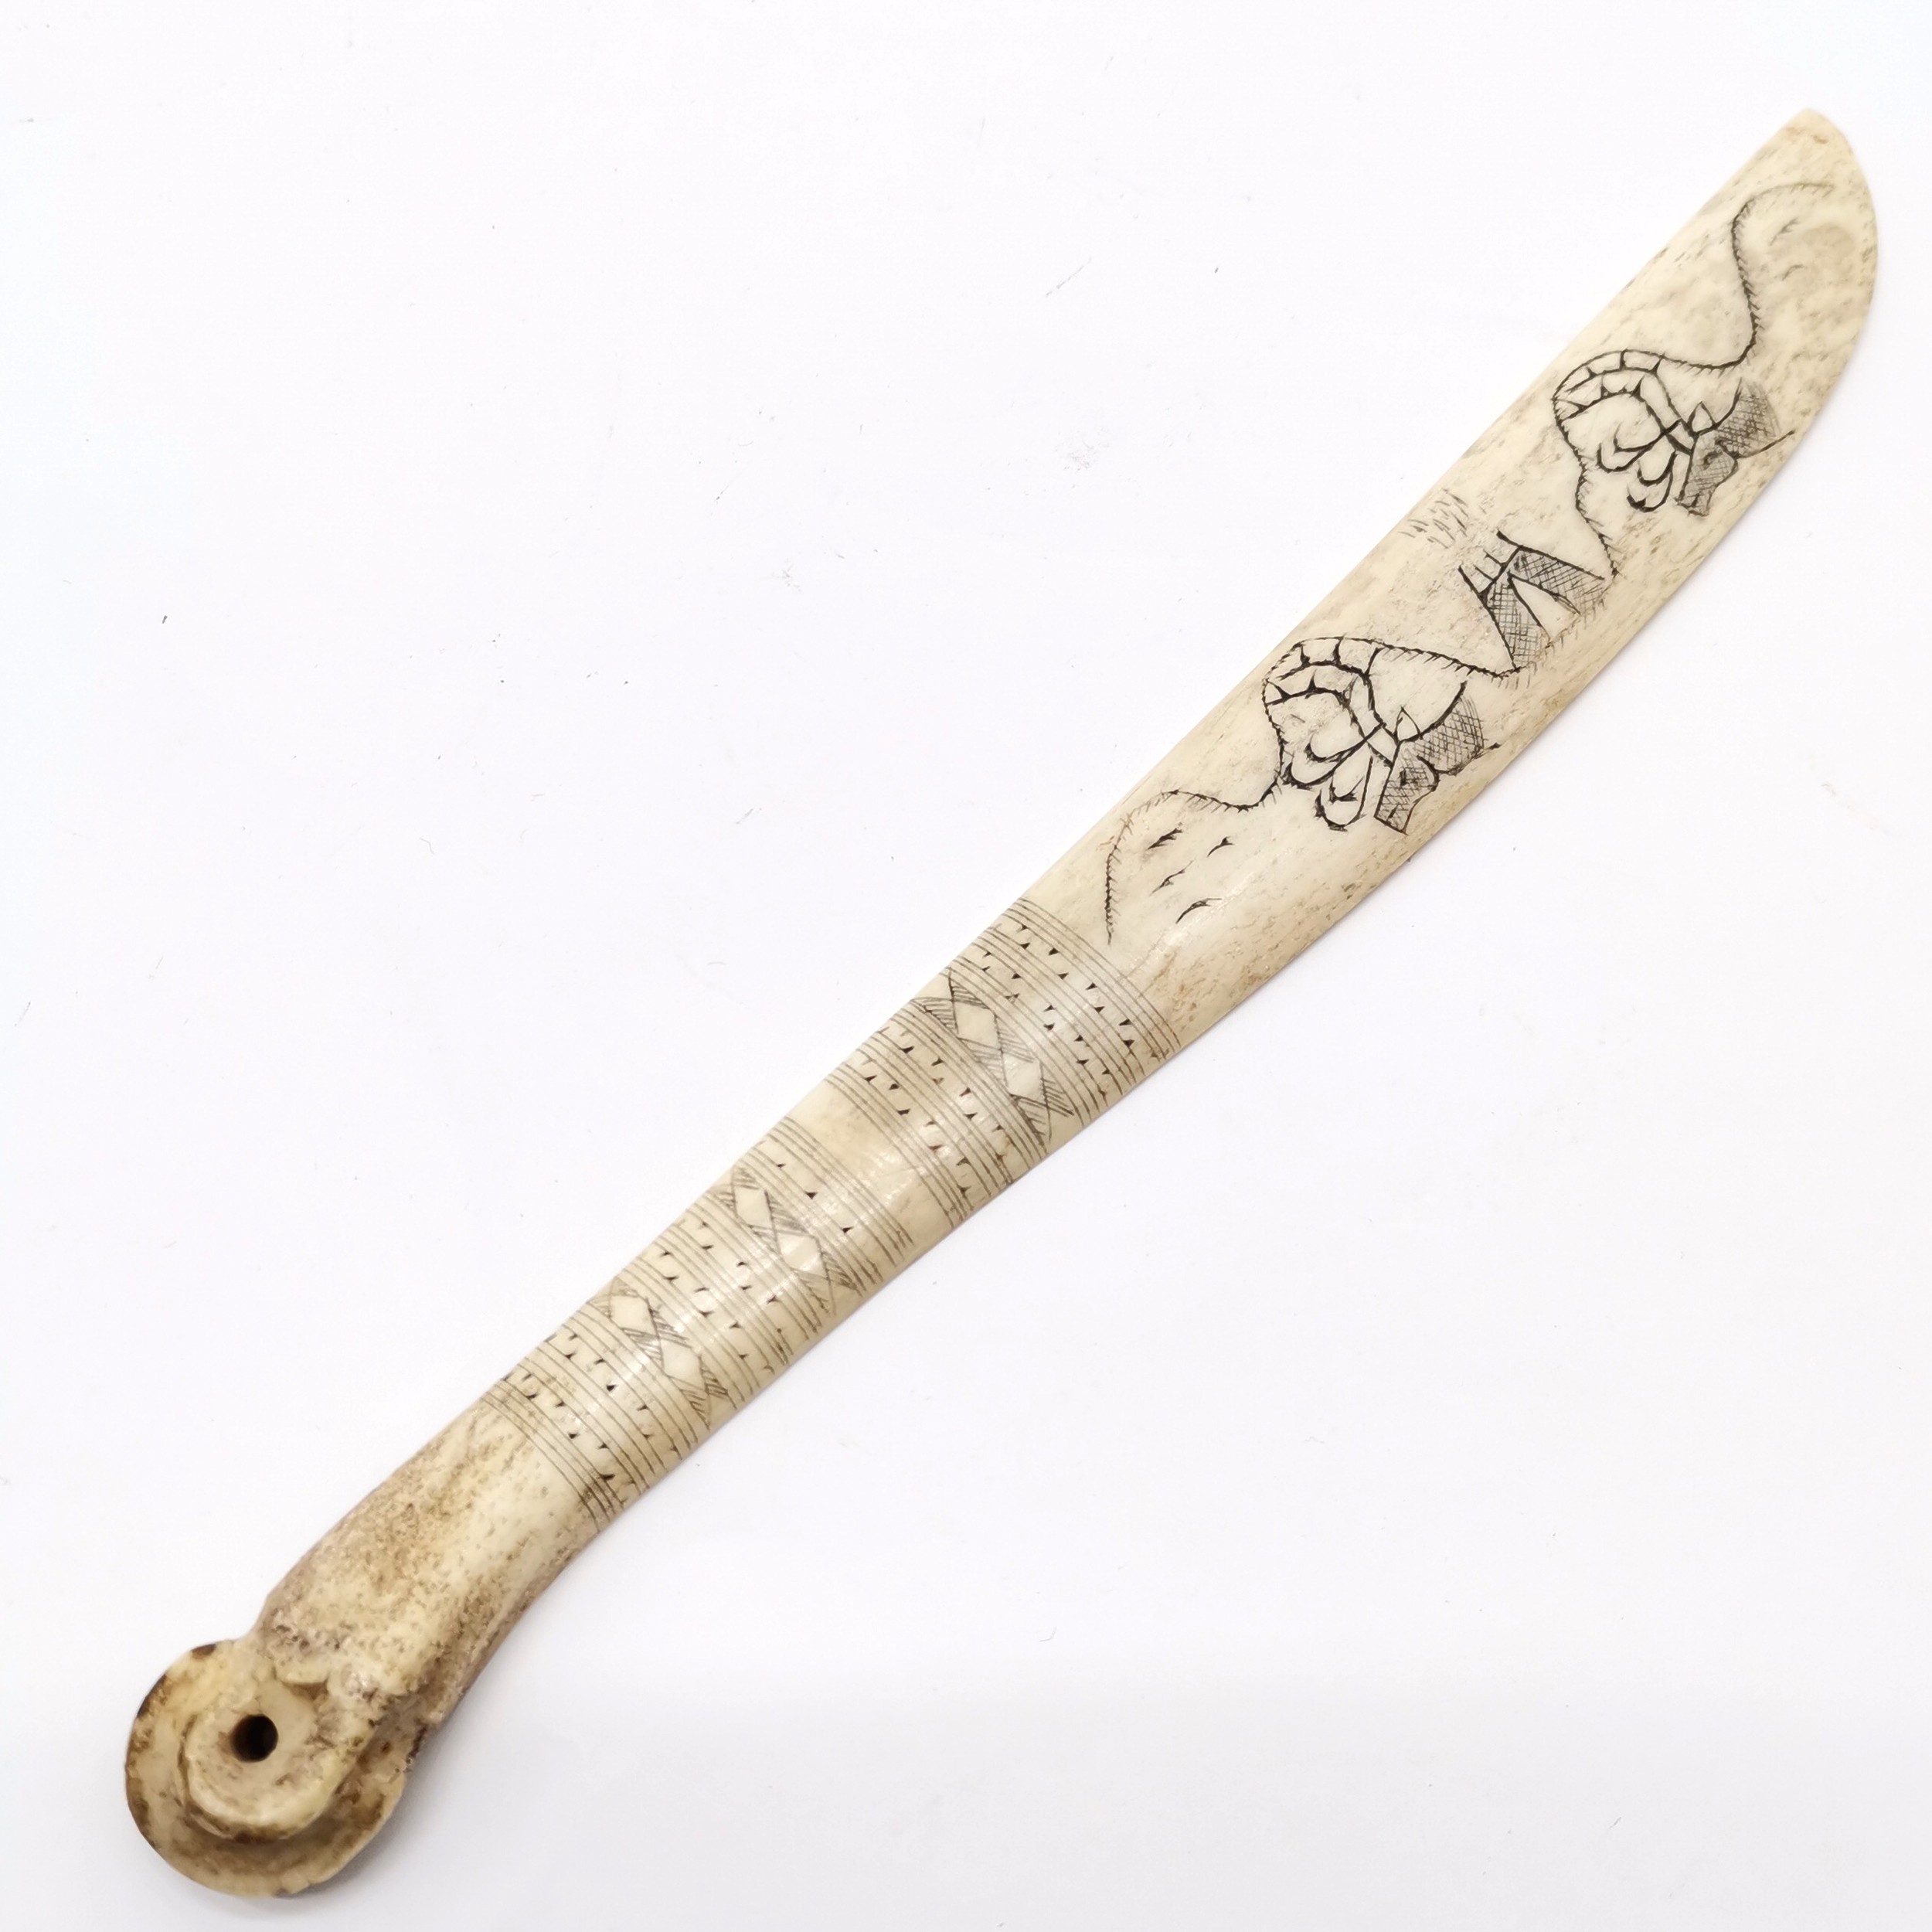 Inuit scrimshaw carved bone scraping knife with carabou & tent detail - 24cm long